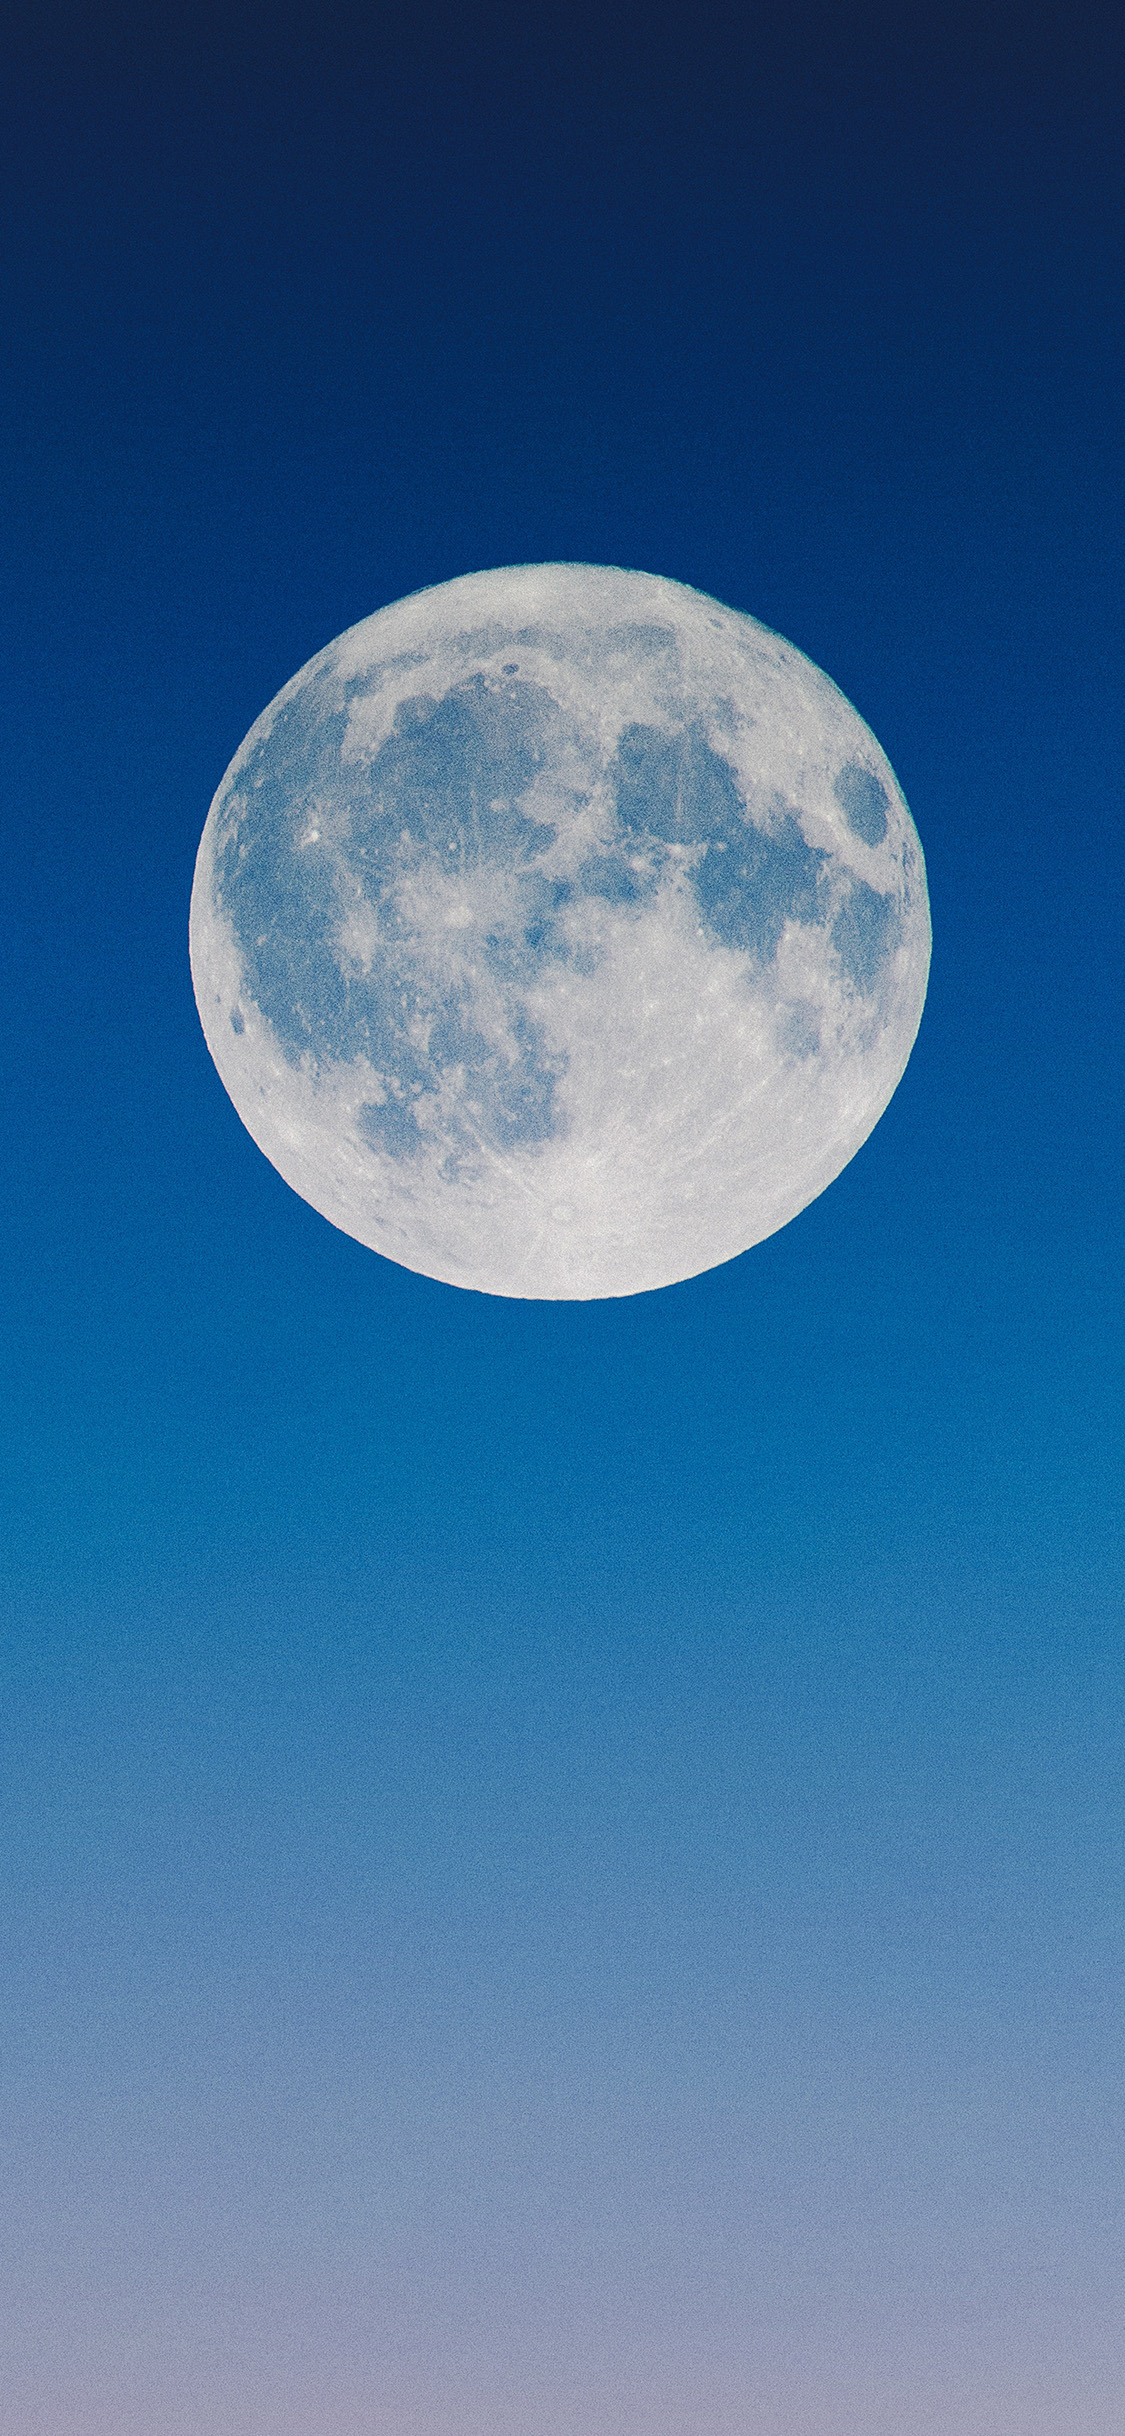 moon wallpaper iphone,moon,sky,daytime,nature,blue